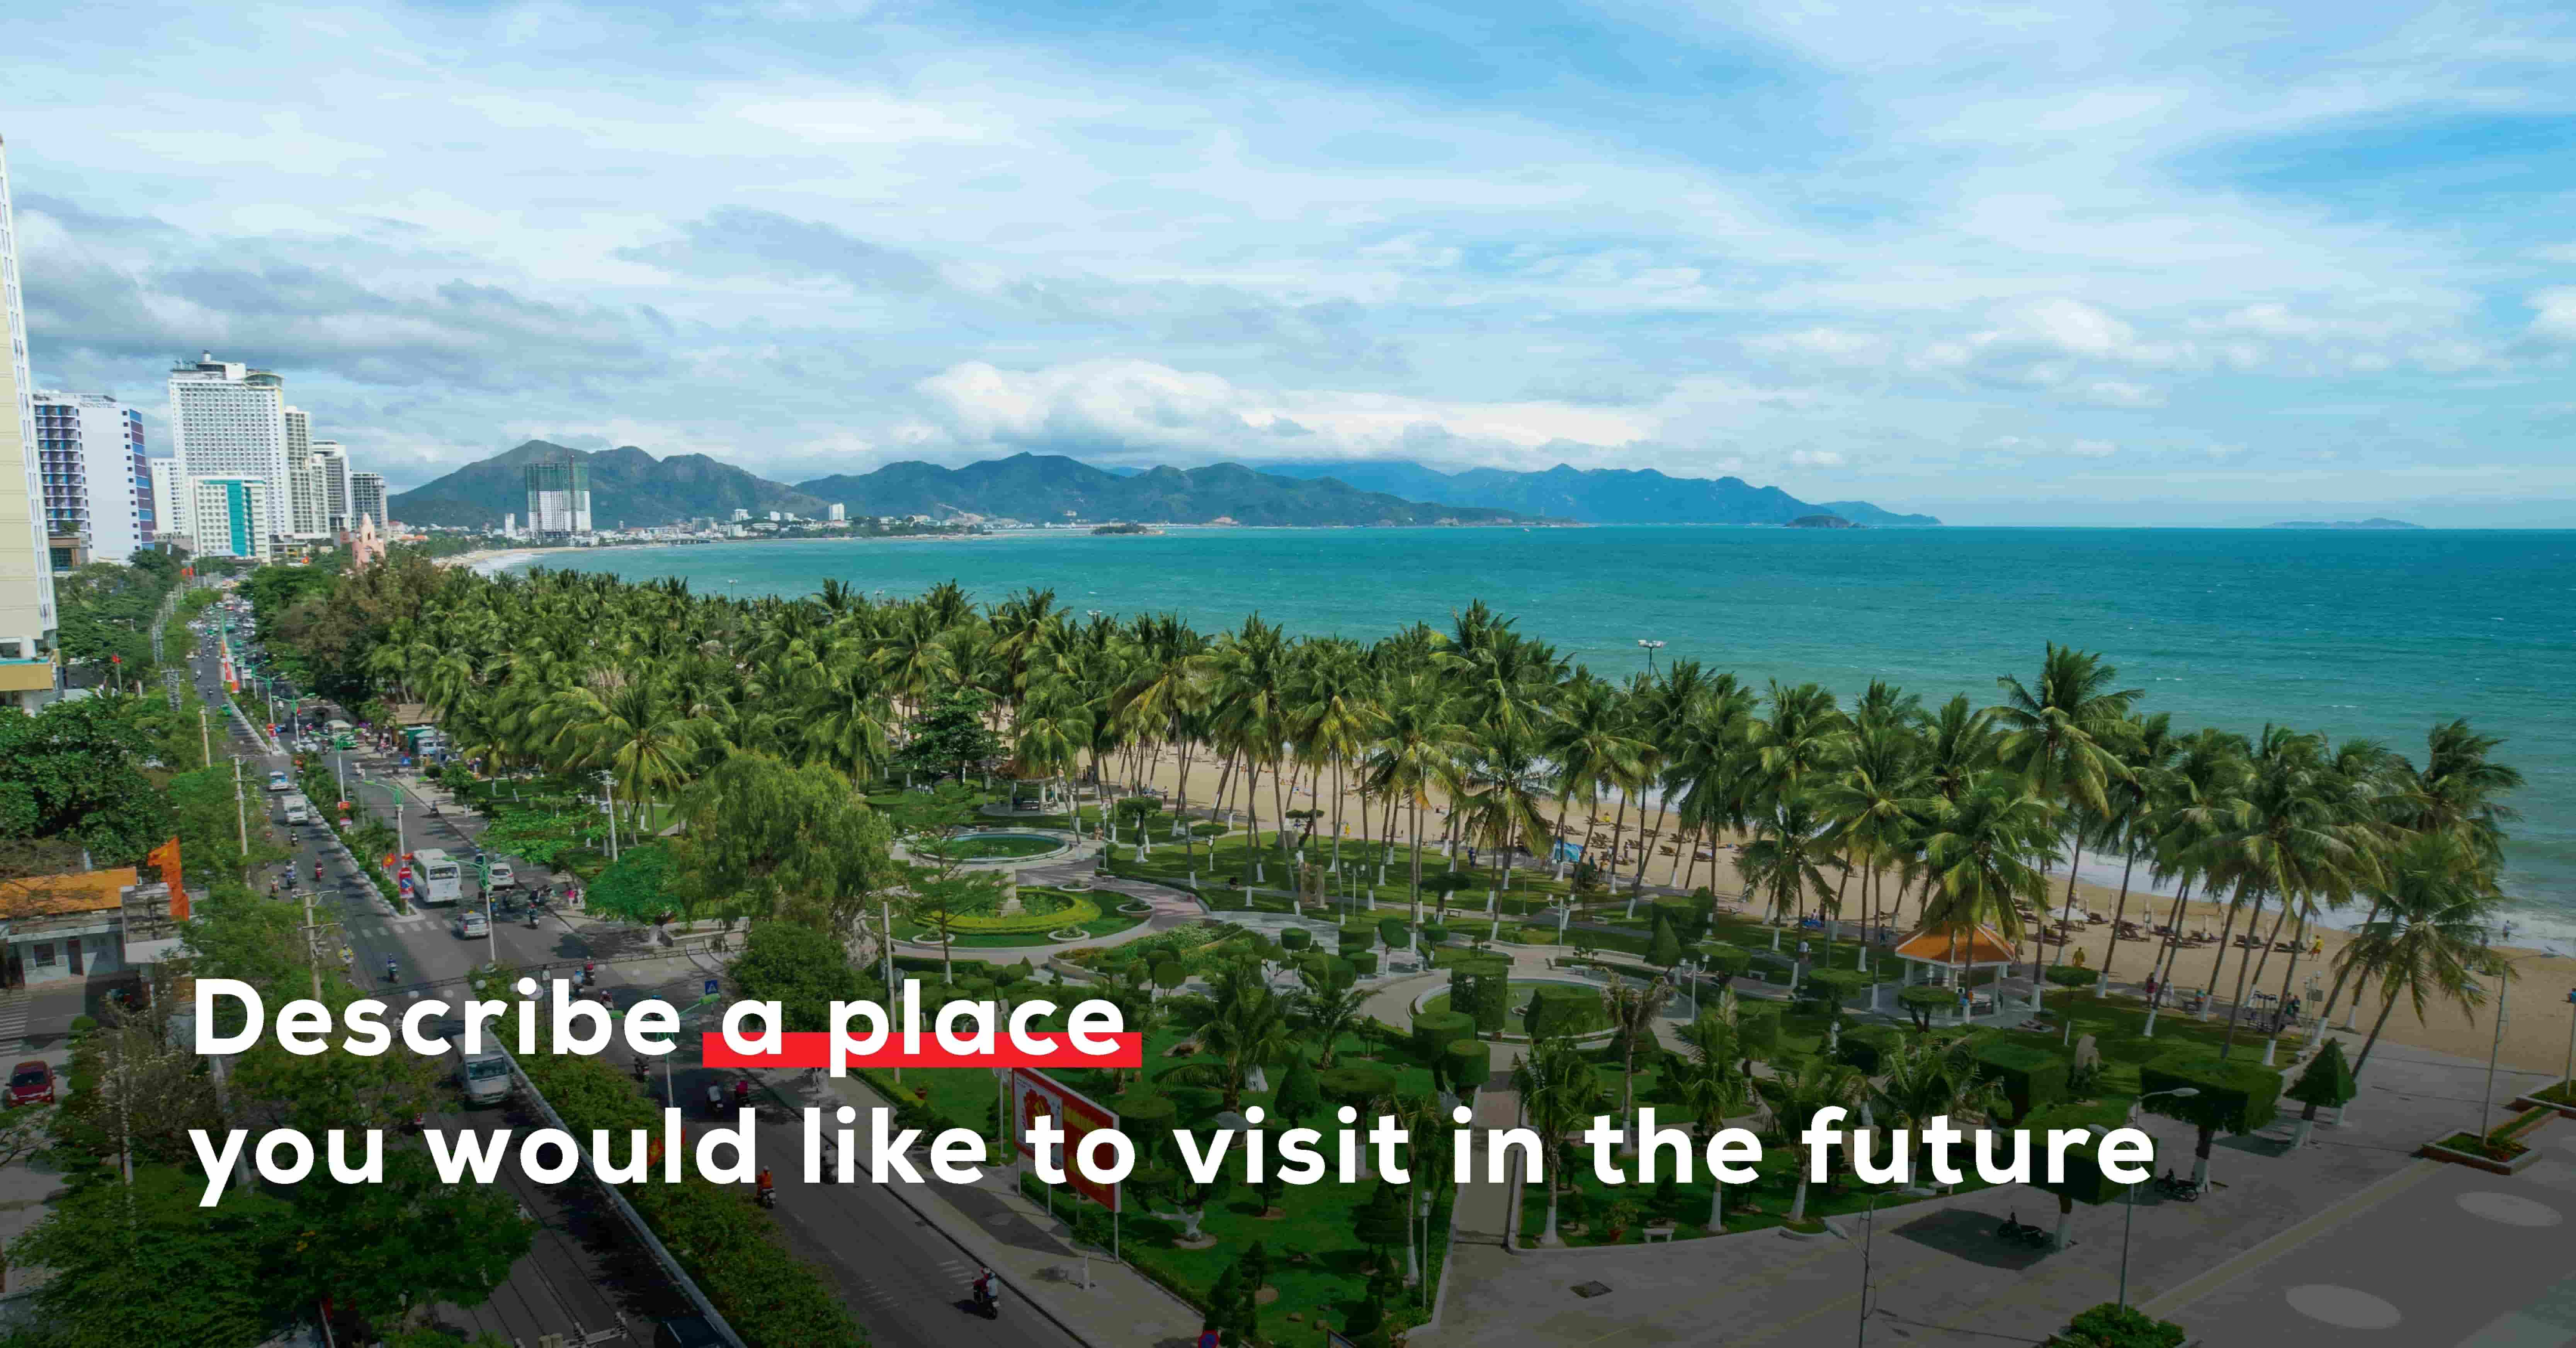 describe a place you would like to visit in the future bai mau kem audio